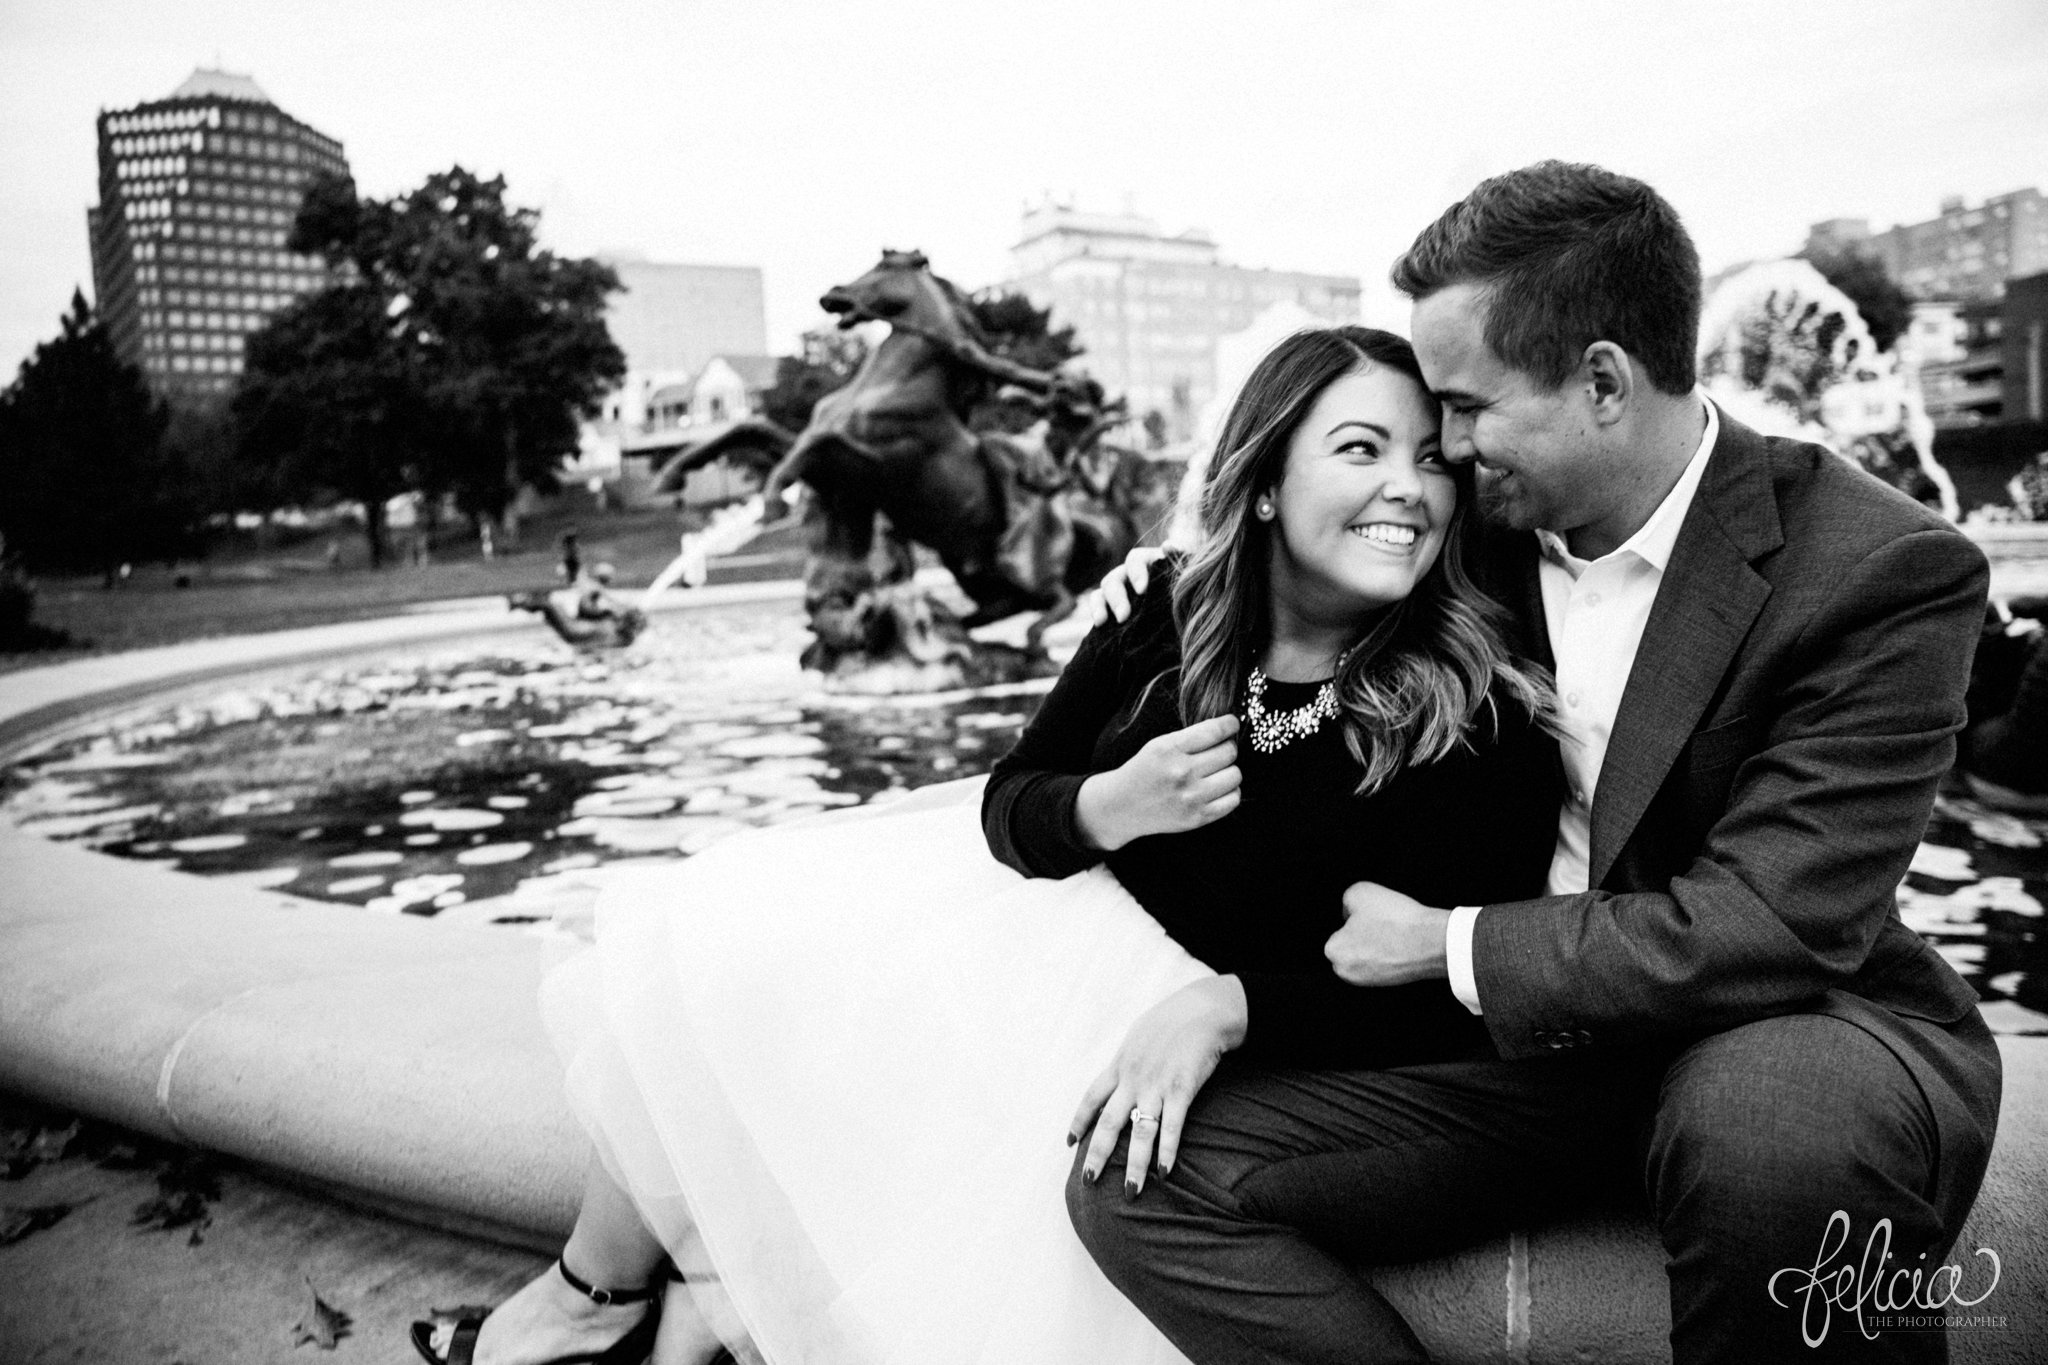 black and white | engagement photos | engagement photography | Kansas City | images by feliciathephotographer.com | architectural backgrounds | downtown | downtown Kansas City | fountain | white tulle | sitting | cuddling | laughter | Plaza Country Club 